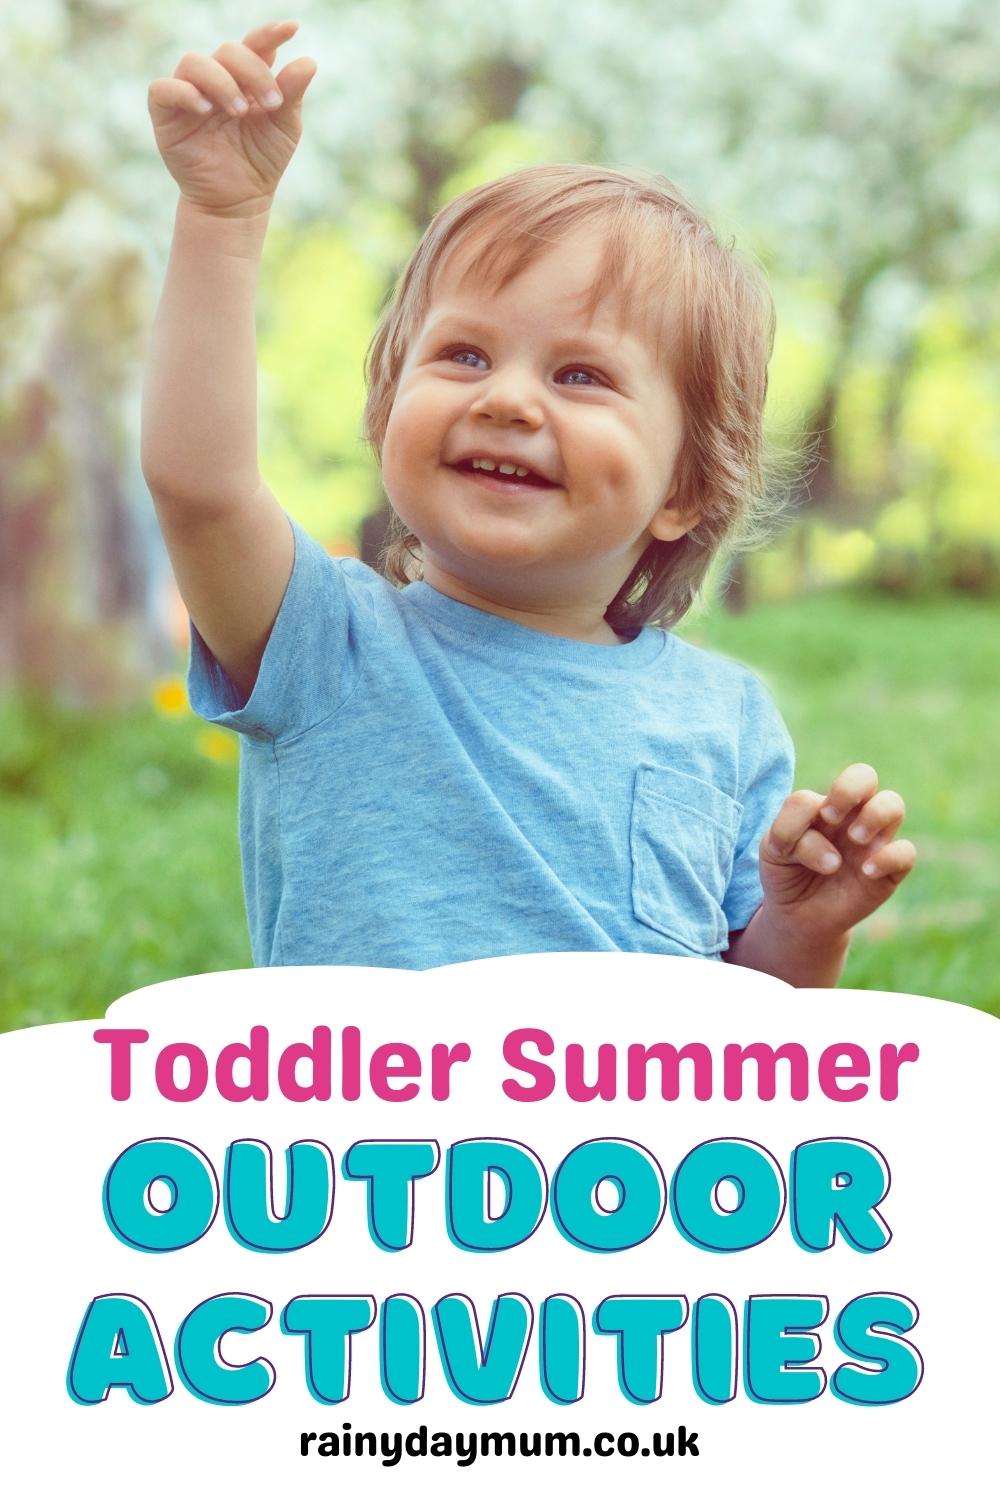 Pinterest Image of a toddler outside in the summer smiling and having fun. Text reads Toddler Summer Outdoor Activities rainydaymum.co.uk